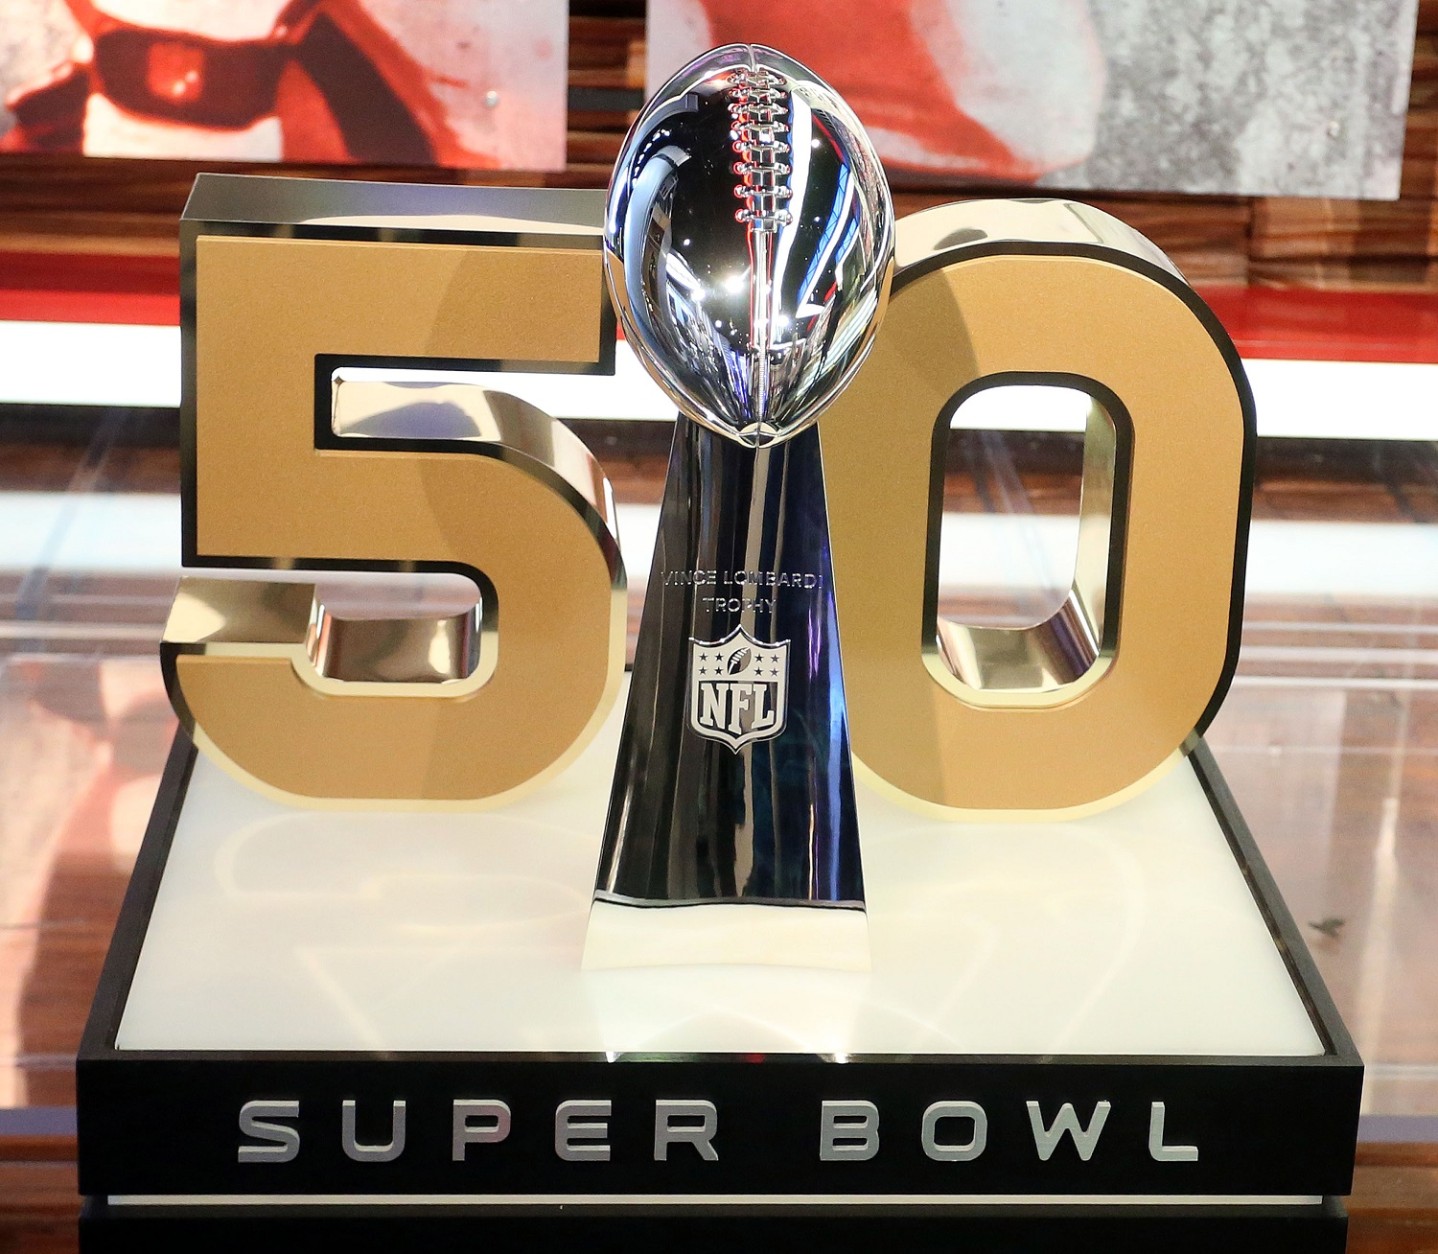 The Super Bowl trophy on display. (Photo by Frederick M. Brown/Getty Images)